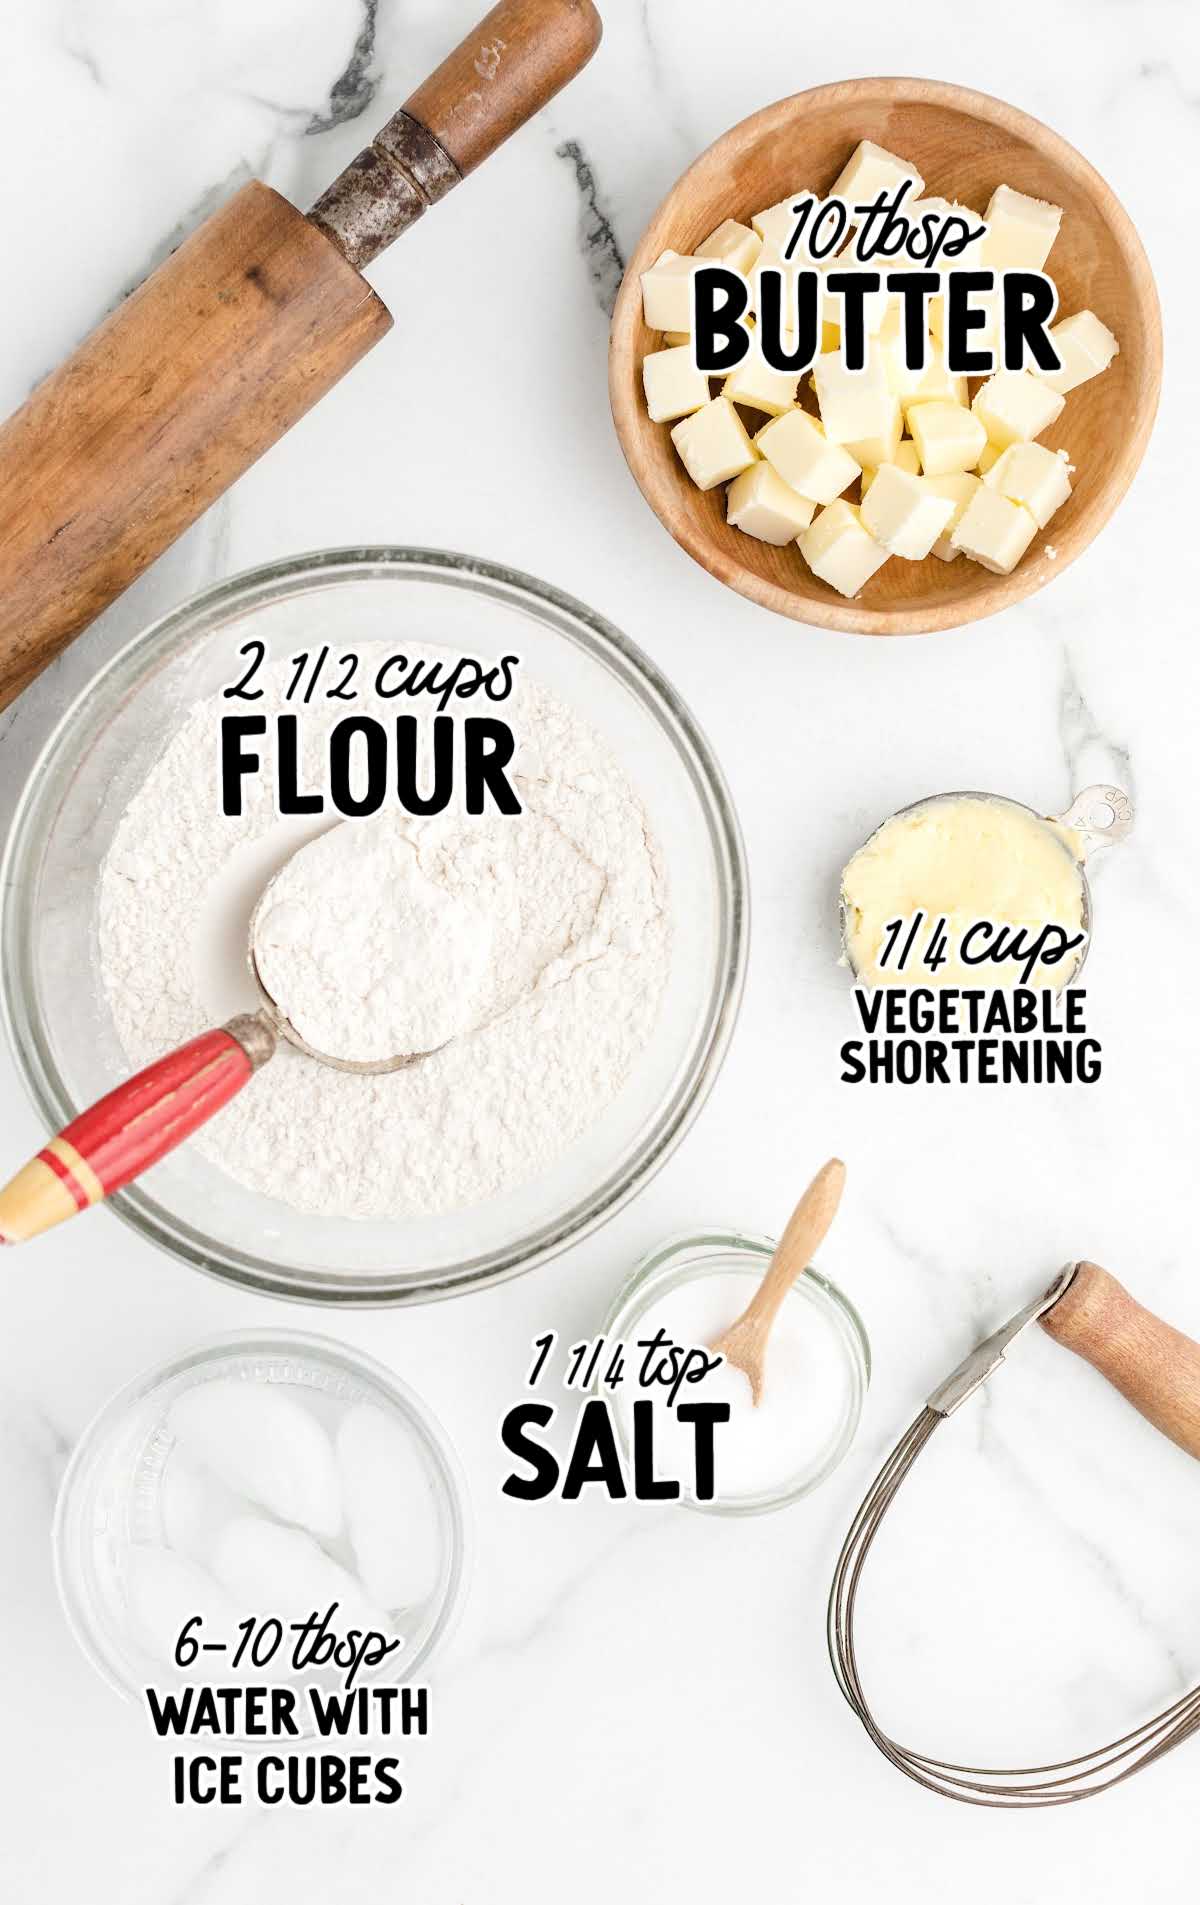 Pie Crust raw ingredients that are labeled